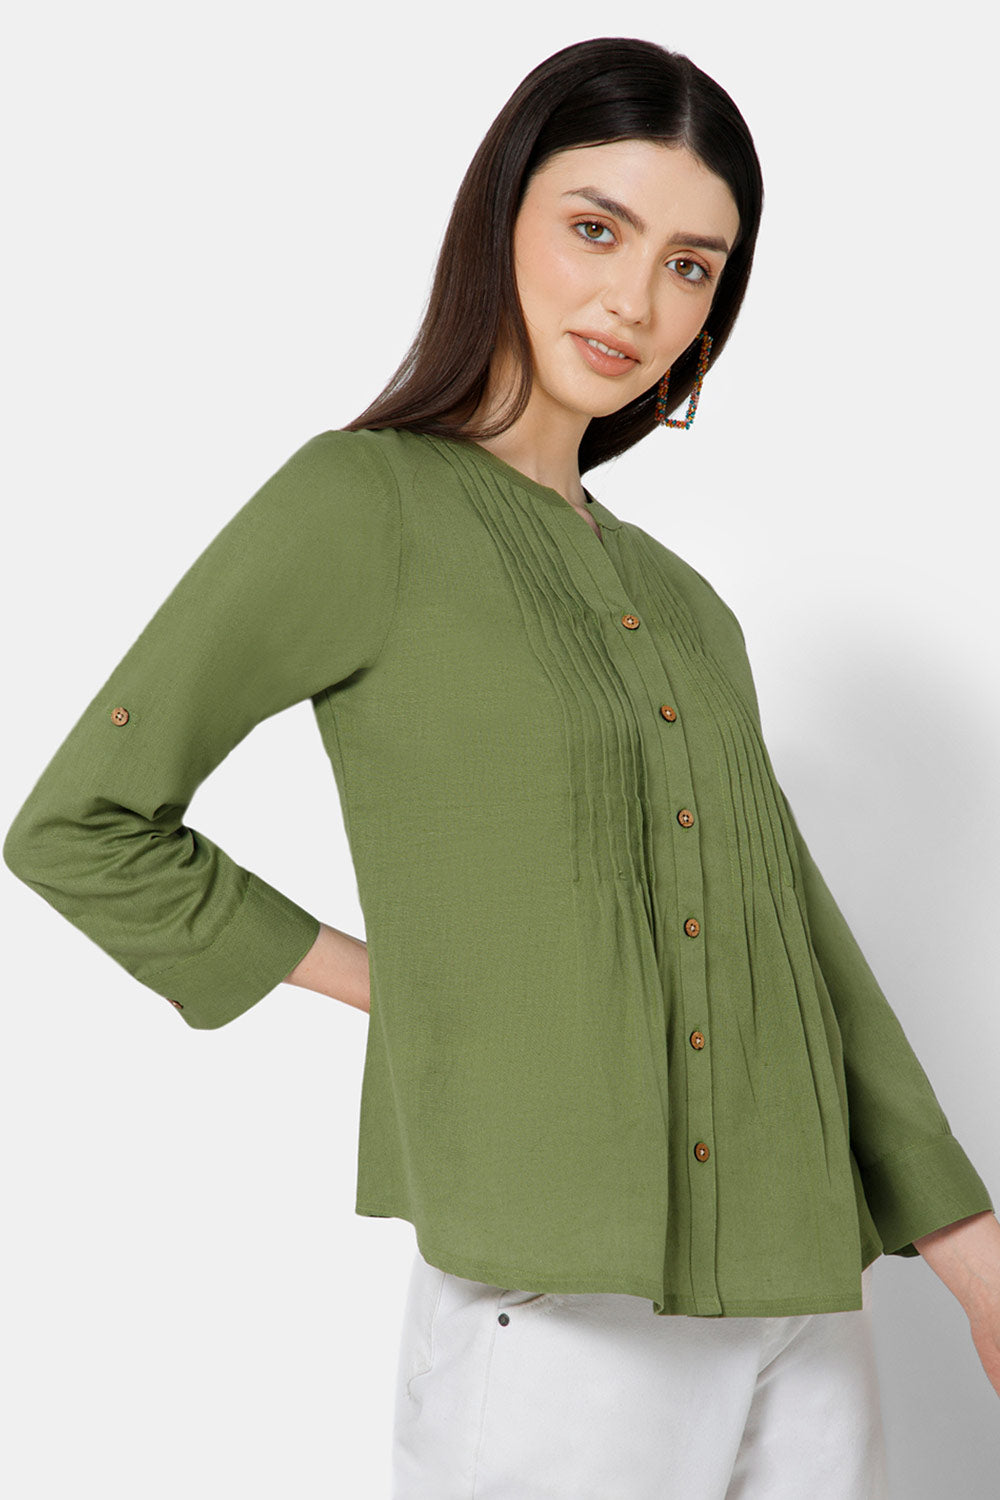 Mythri Women's Regular Casual top - Green - TO20